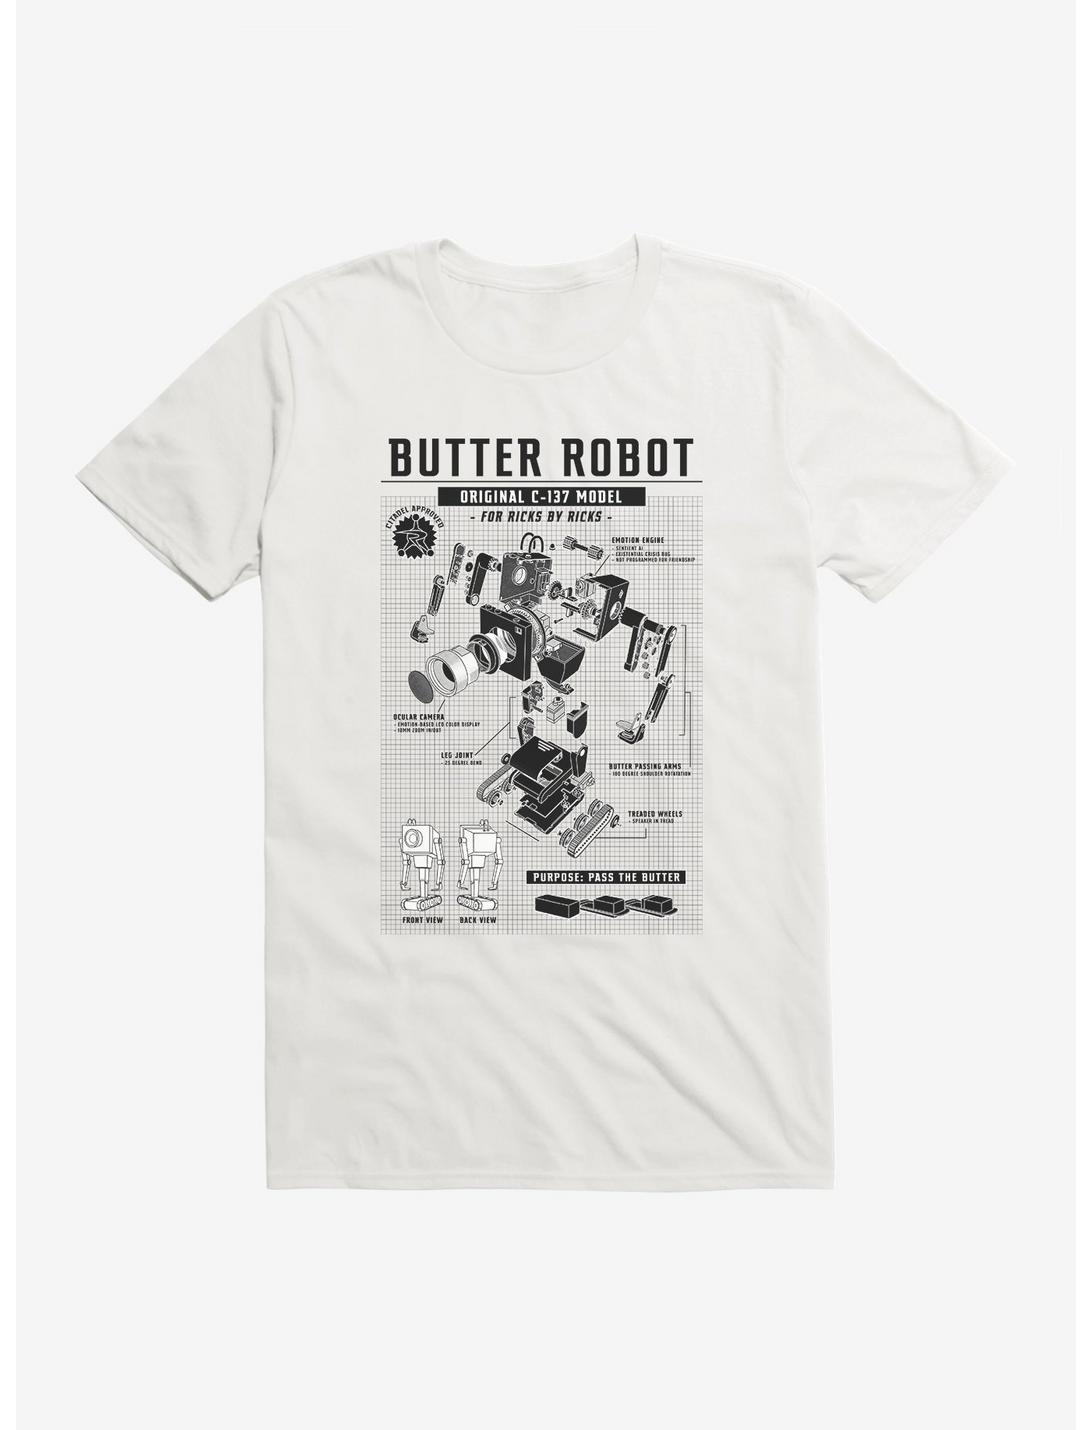 Rick And Morty Butter Robot Original Model T-Shirt Hot Topic Exclusive, WHITE, hi-res